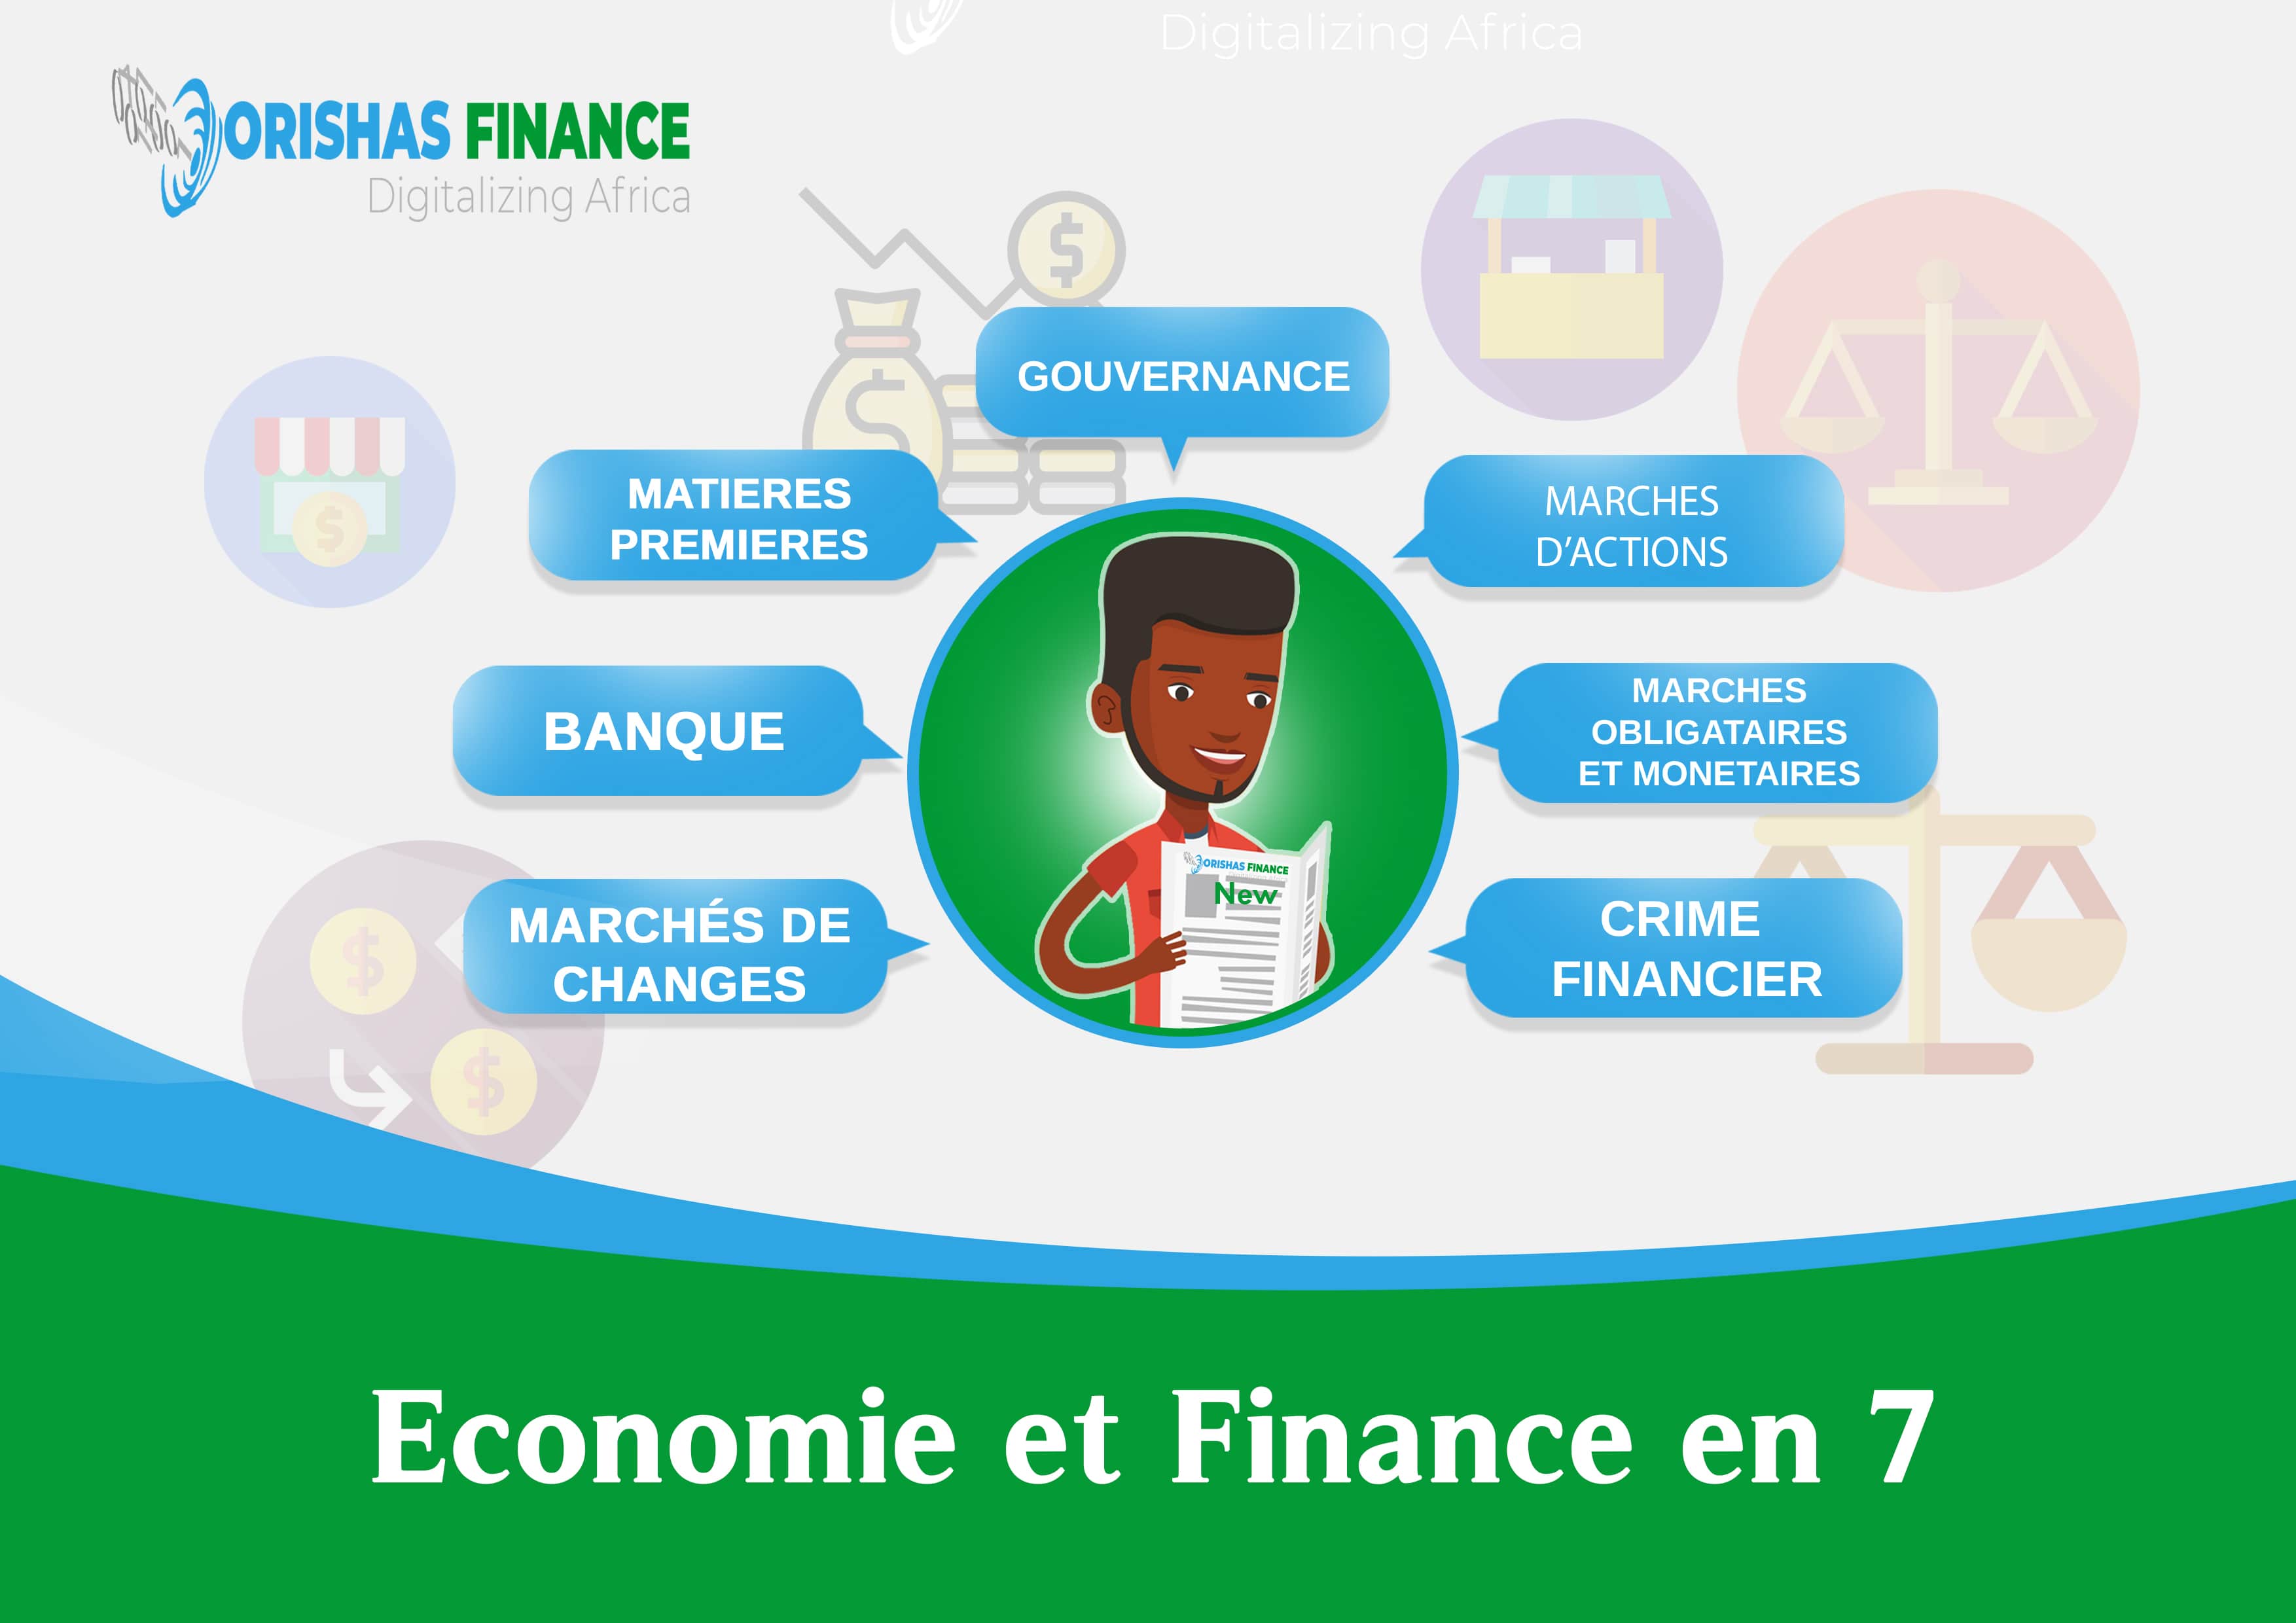  Economy and Finance in 7 from May 24 to 28, 2021 